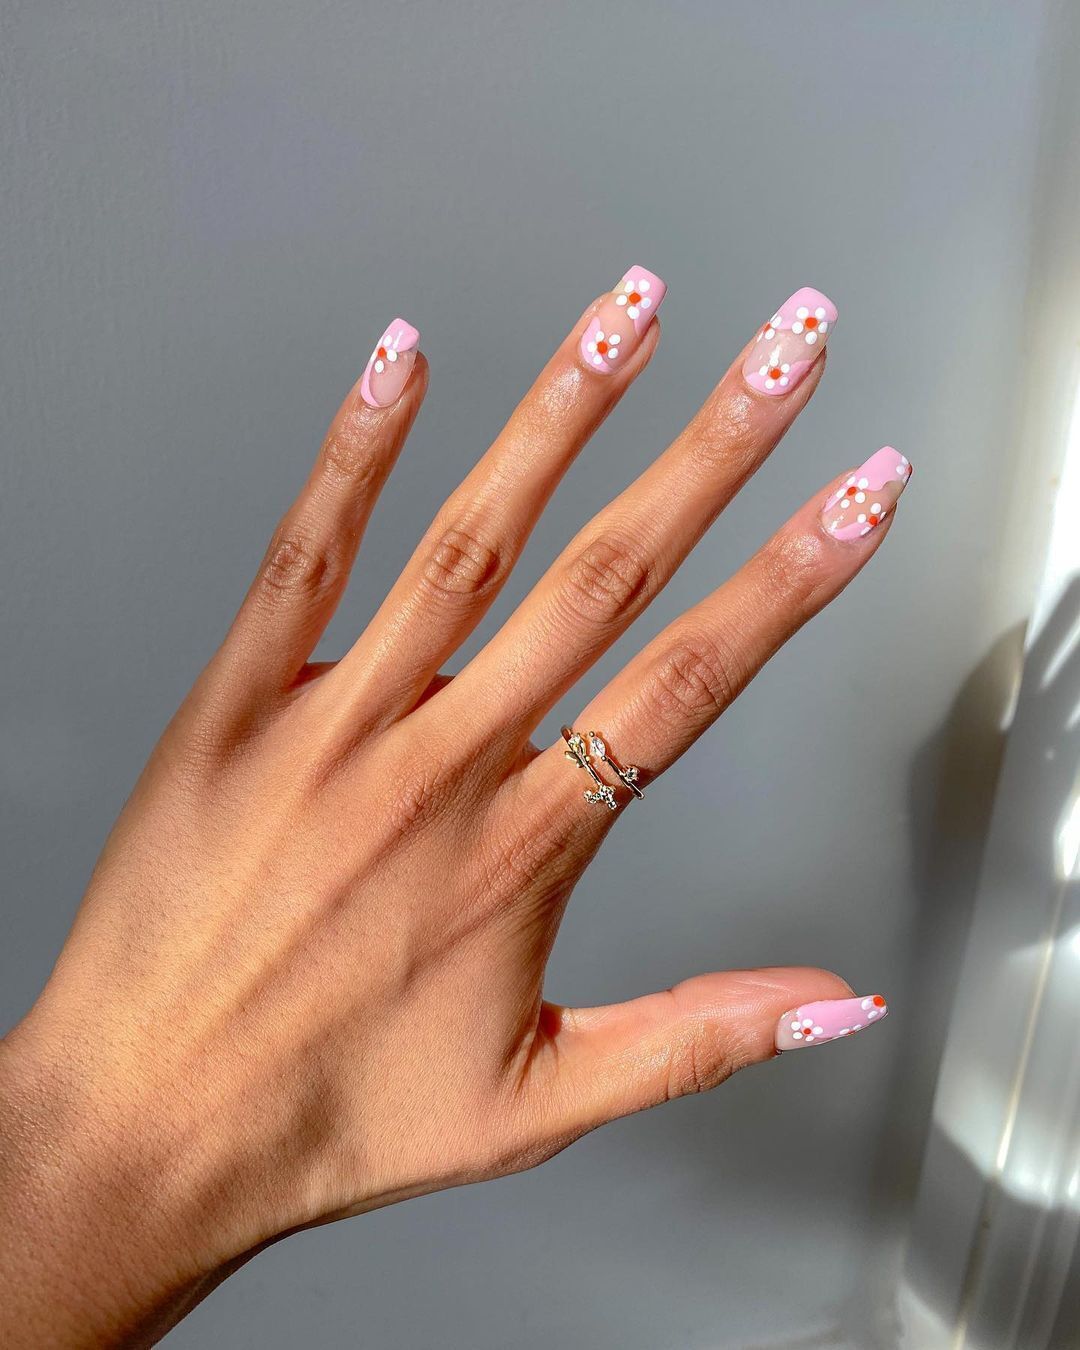 Spring is coming soon. What manicure will be in fashion and why you should pay attention to floral design and jelly nails